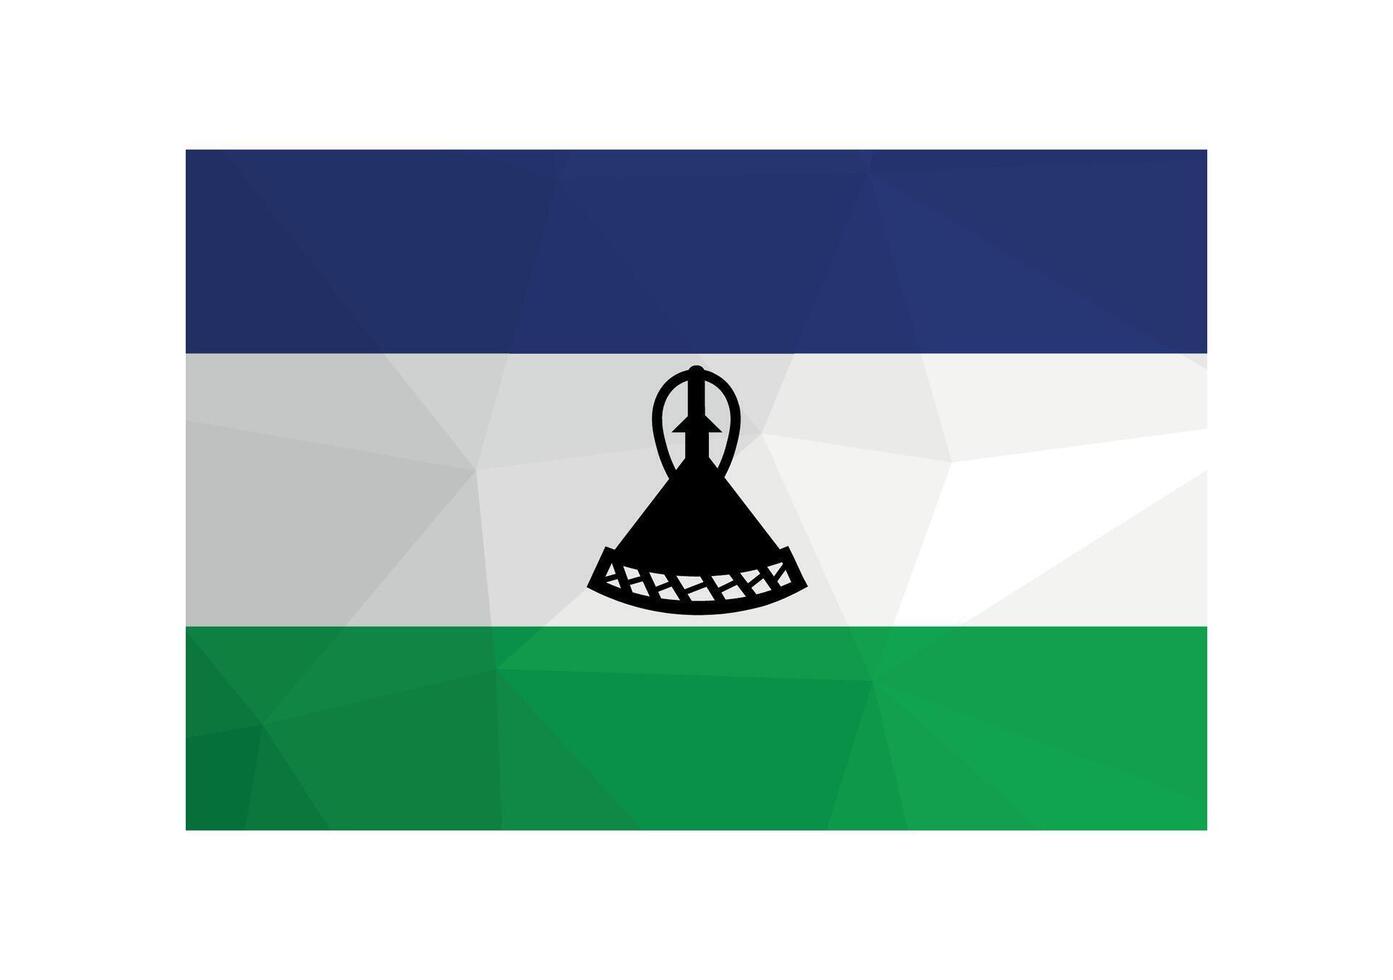 Vector illustration. Official symbol of Lesotho. National flag in blue, white, green colors and black hat. Creative design in low poly style with triangular shapes.